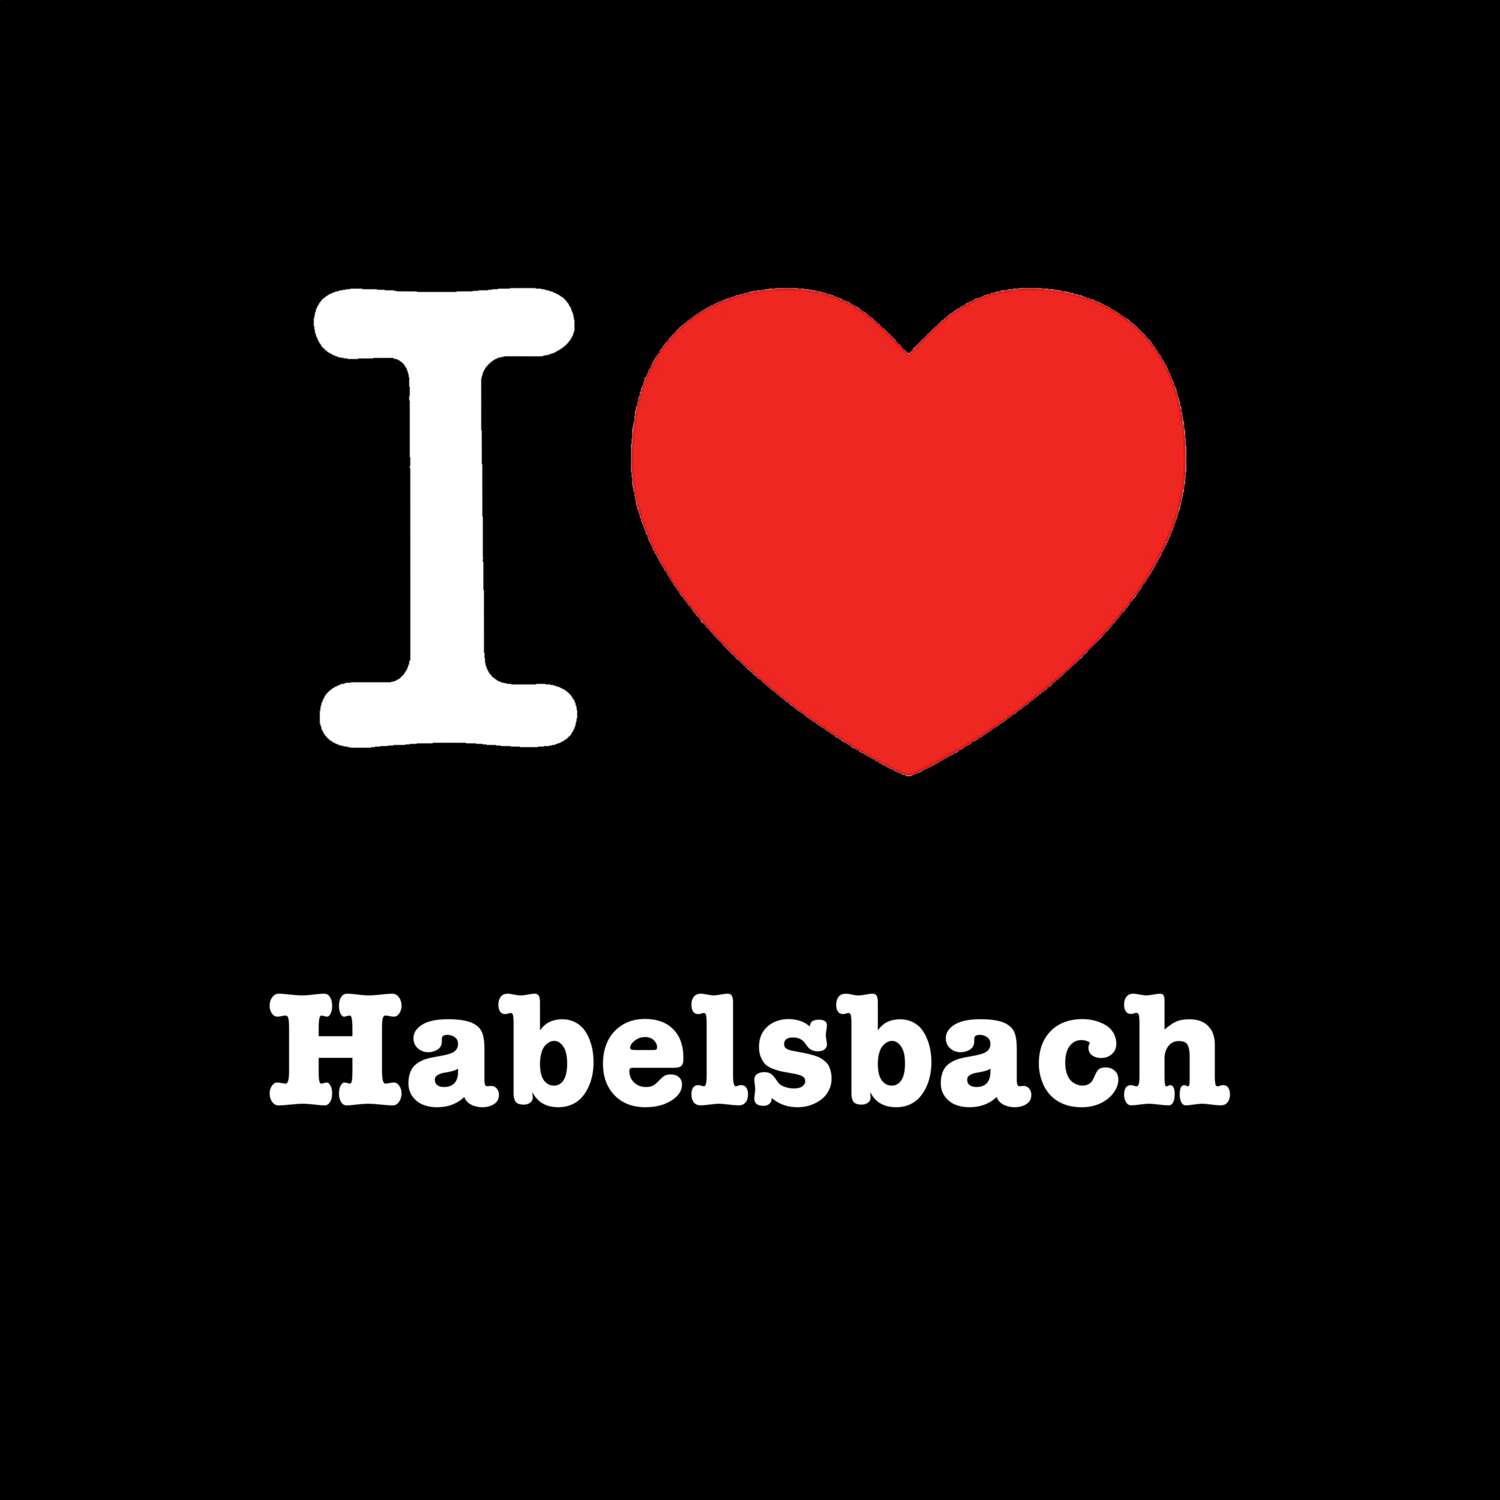 Habelsbach T-Shirt »I love«